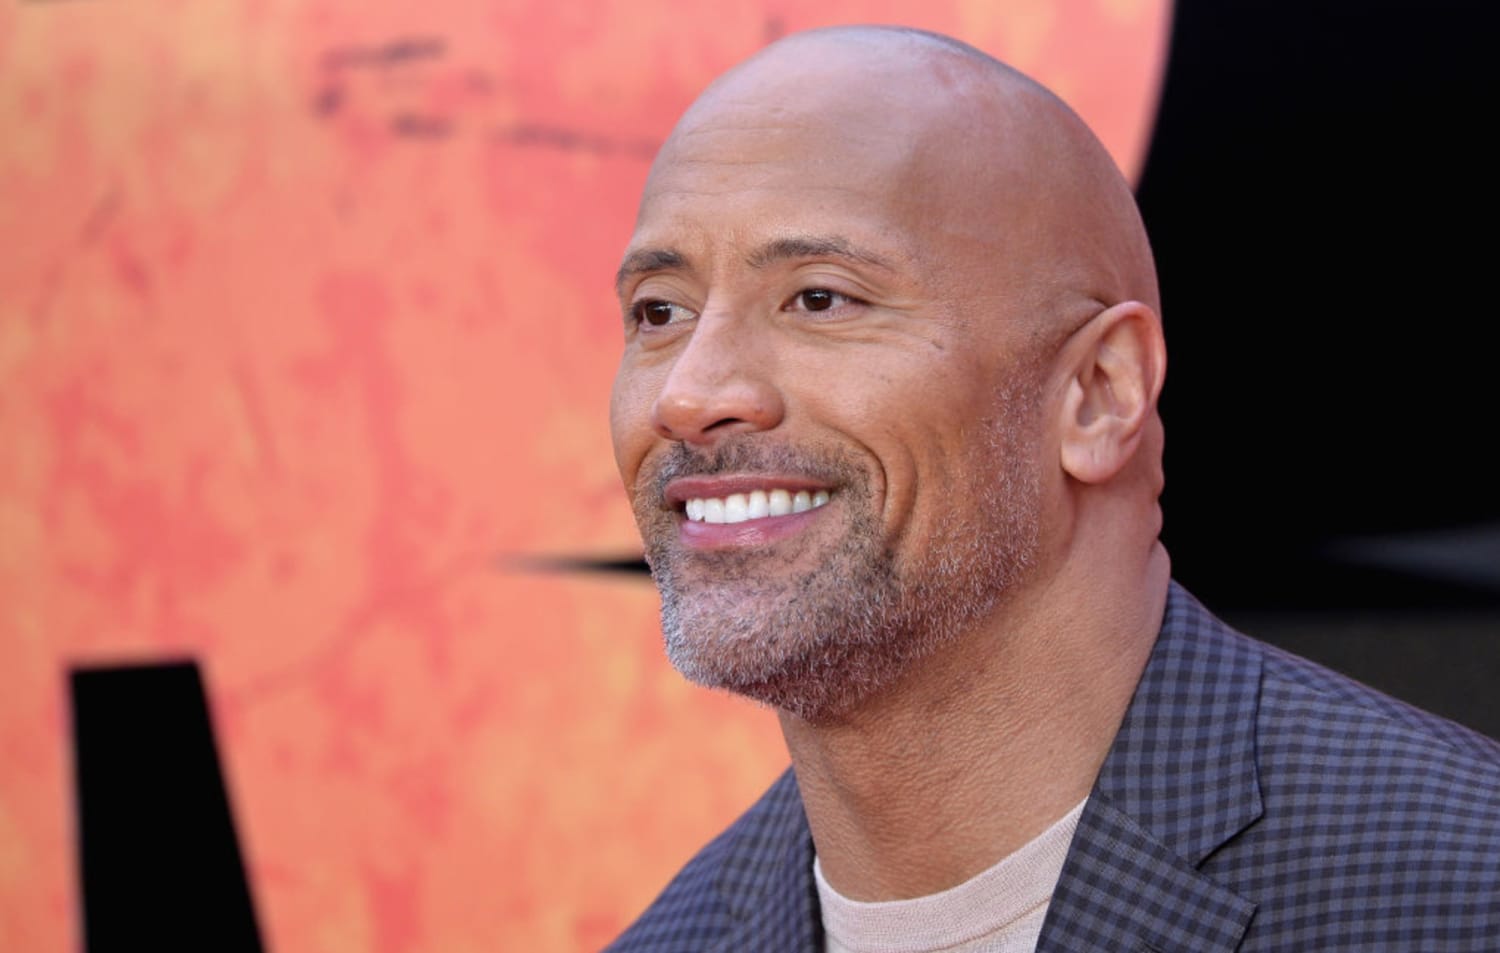 Dwayne 'The Rock' Johnson pulls home gate off wall with bare hands